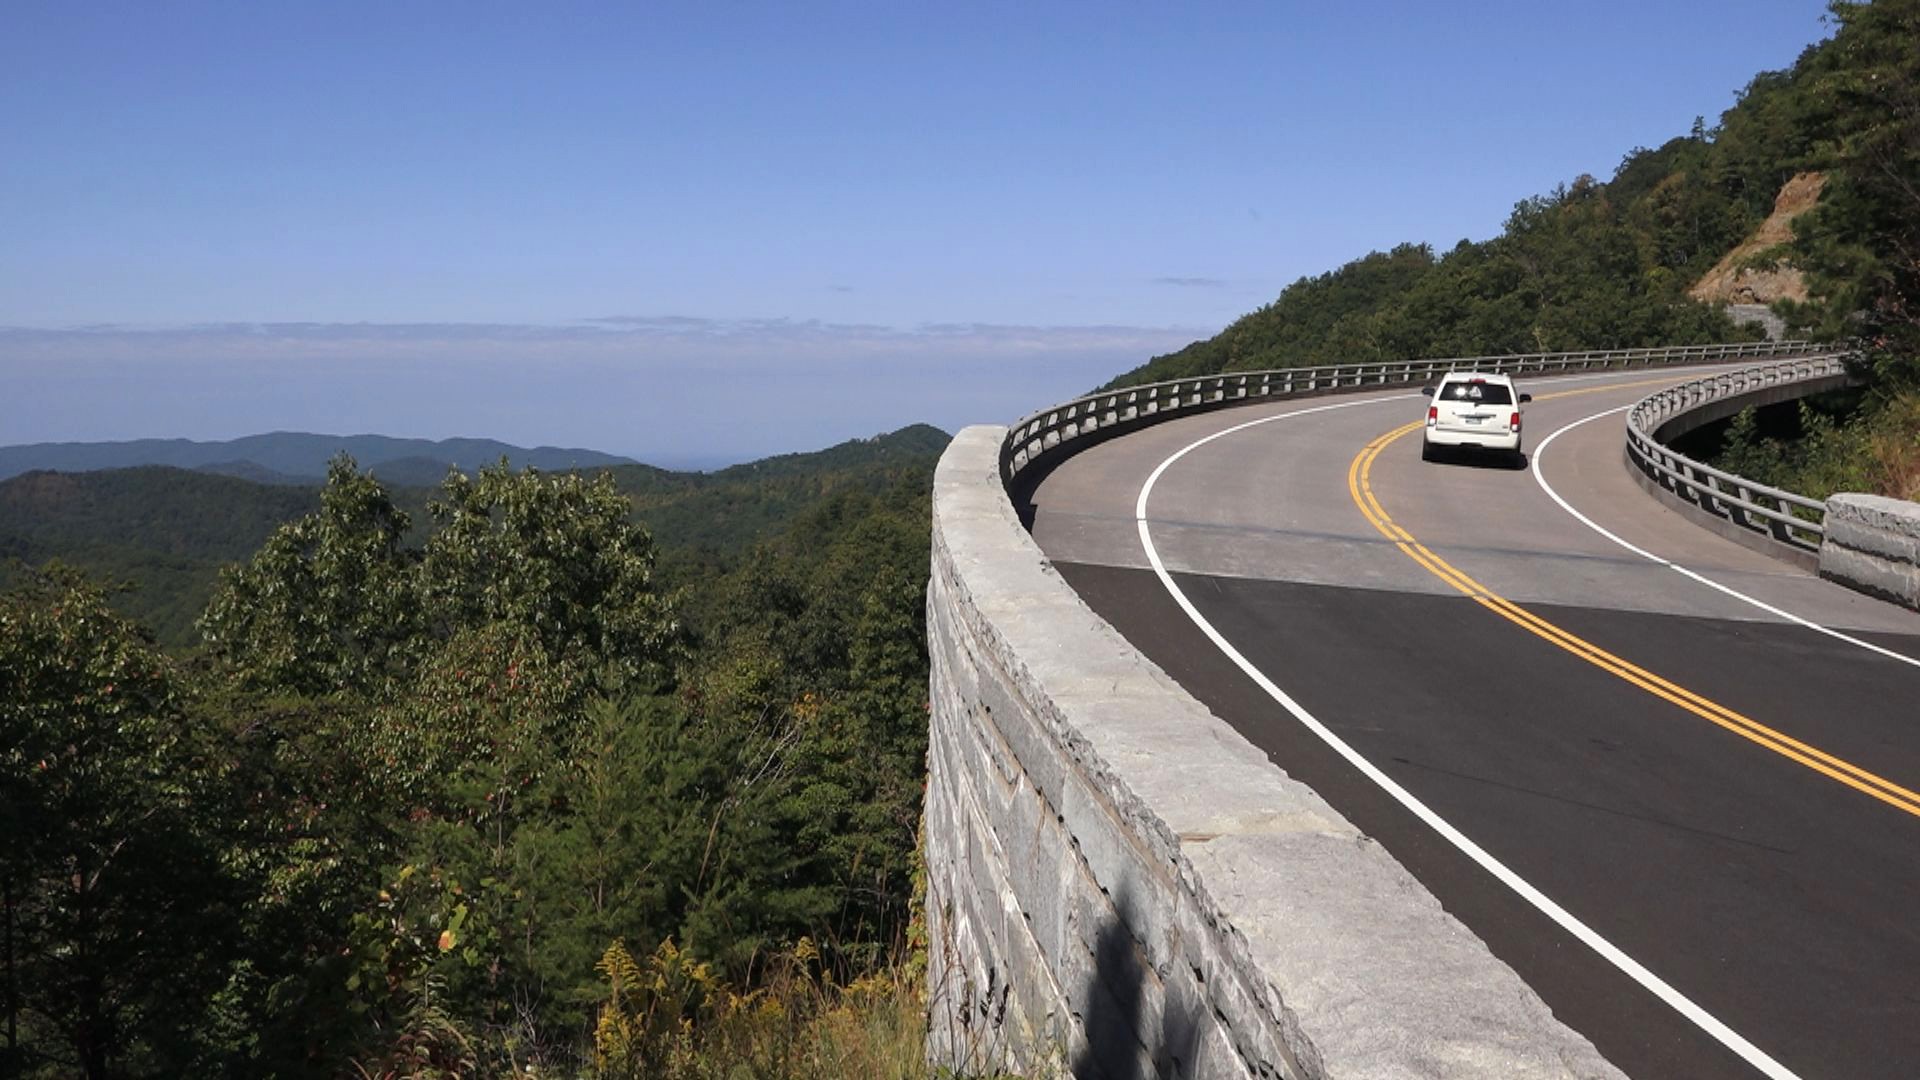 A bridge on the new section of the Foothills Parkway in the Great Smoky Mountains now honors a longtime advocate who helped make the scenic route a reality.